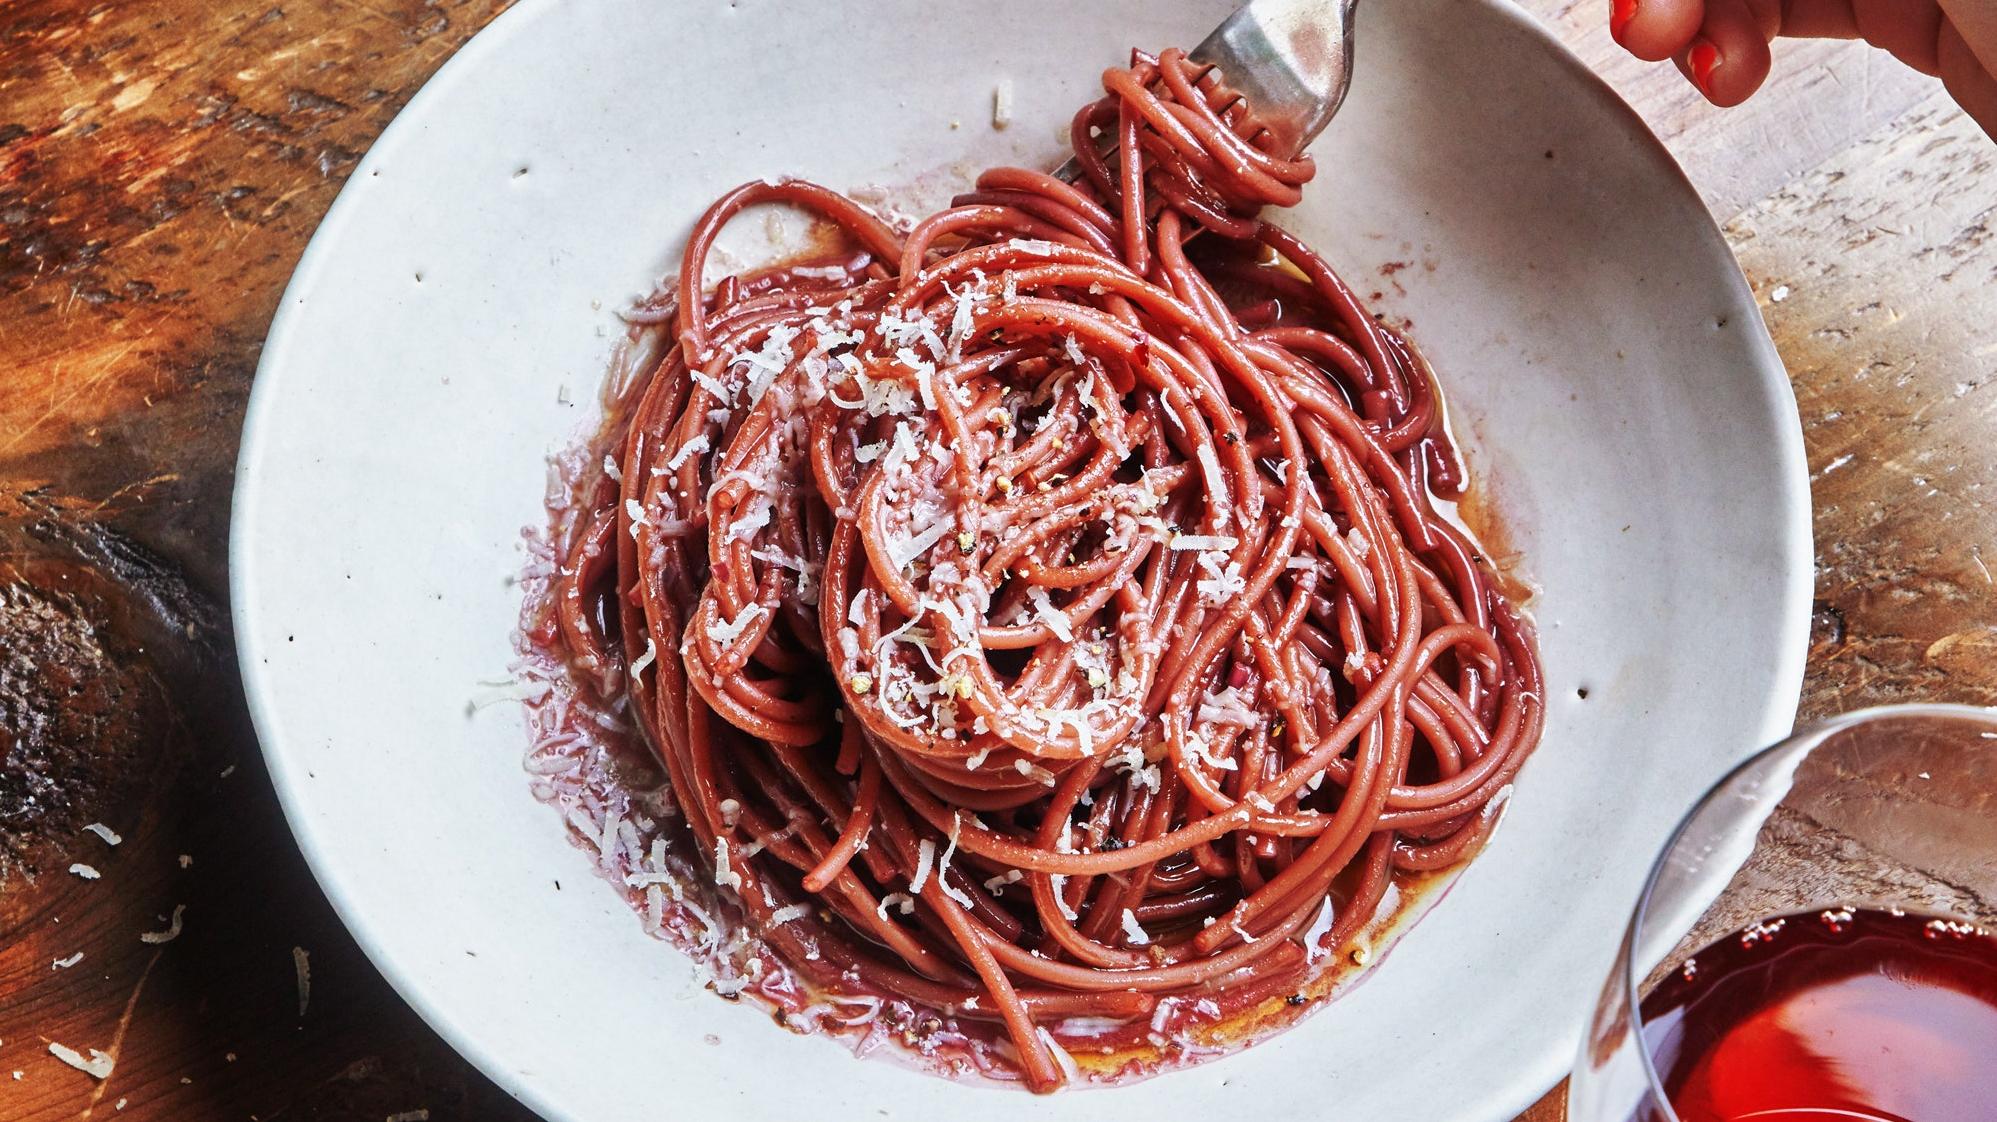  Twirl your fork into this rich and savory spaghetti.